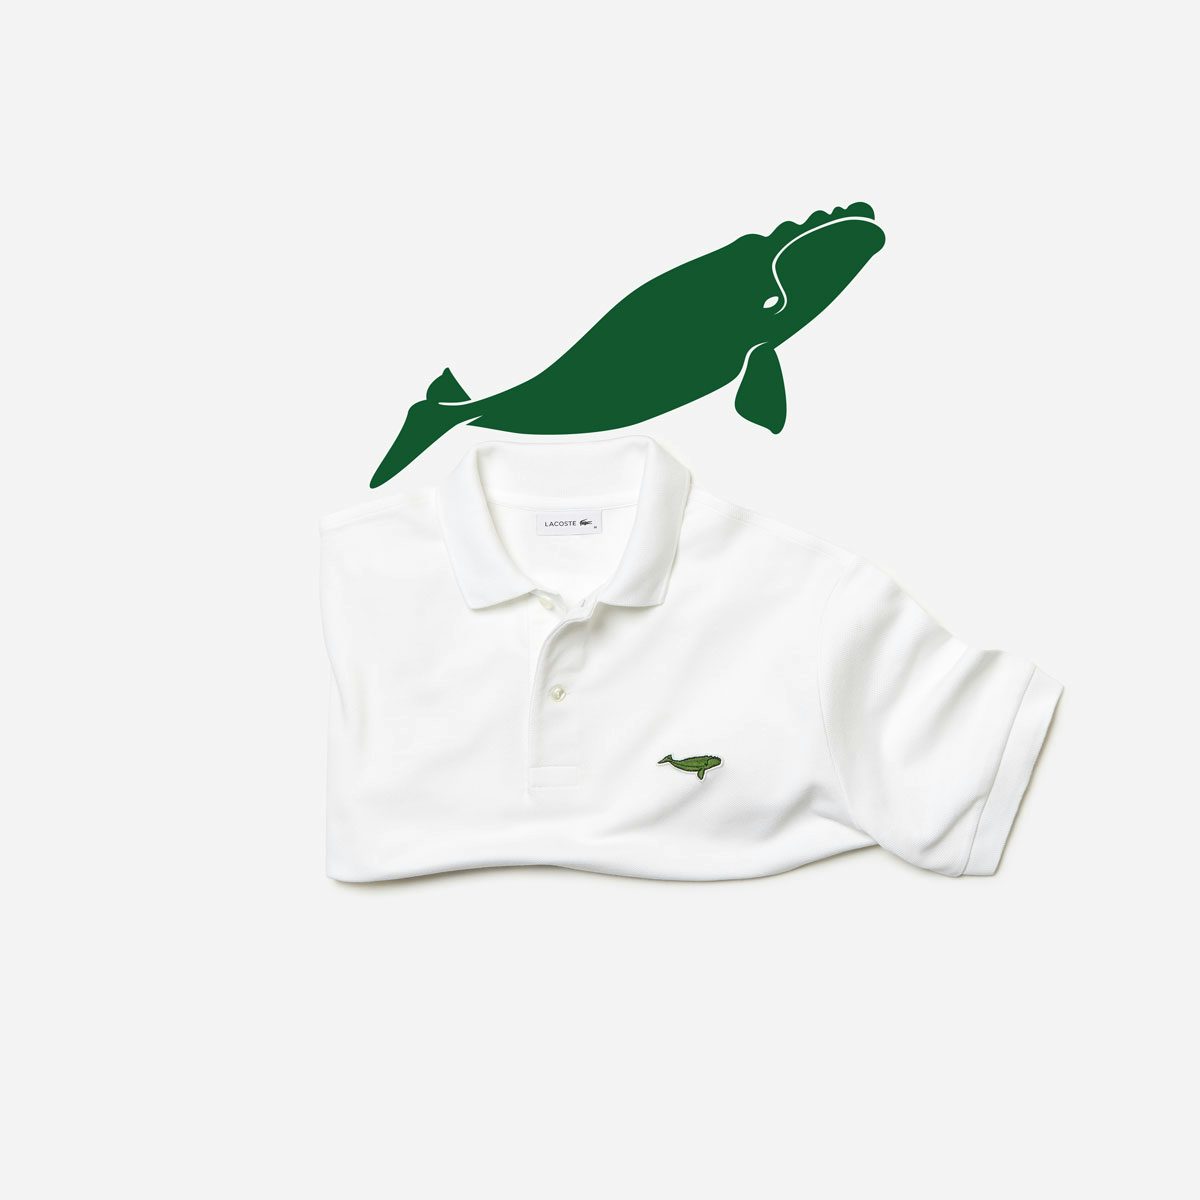 Har råd til Ulykke kredsløb Lacoste continues fight to save endangered animals in new campaign